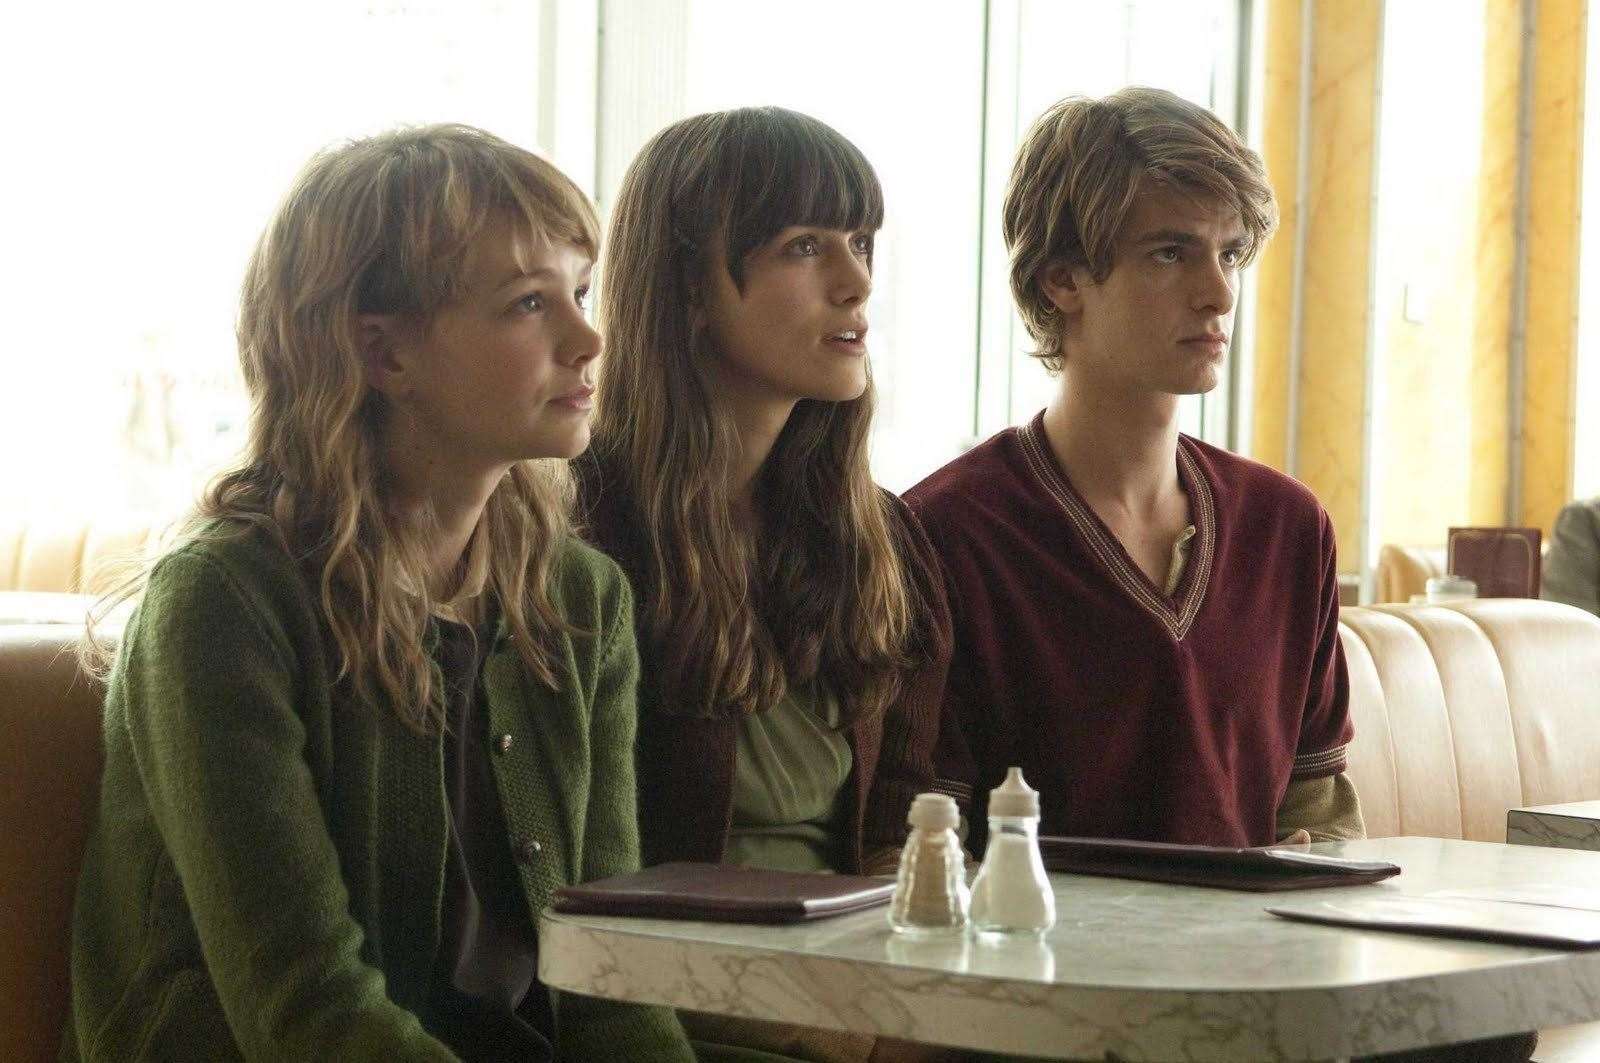 David worked on Never Let Me Go, starring, from left, Carey Mulligan, Keira Knightley, and Andrew Garfield